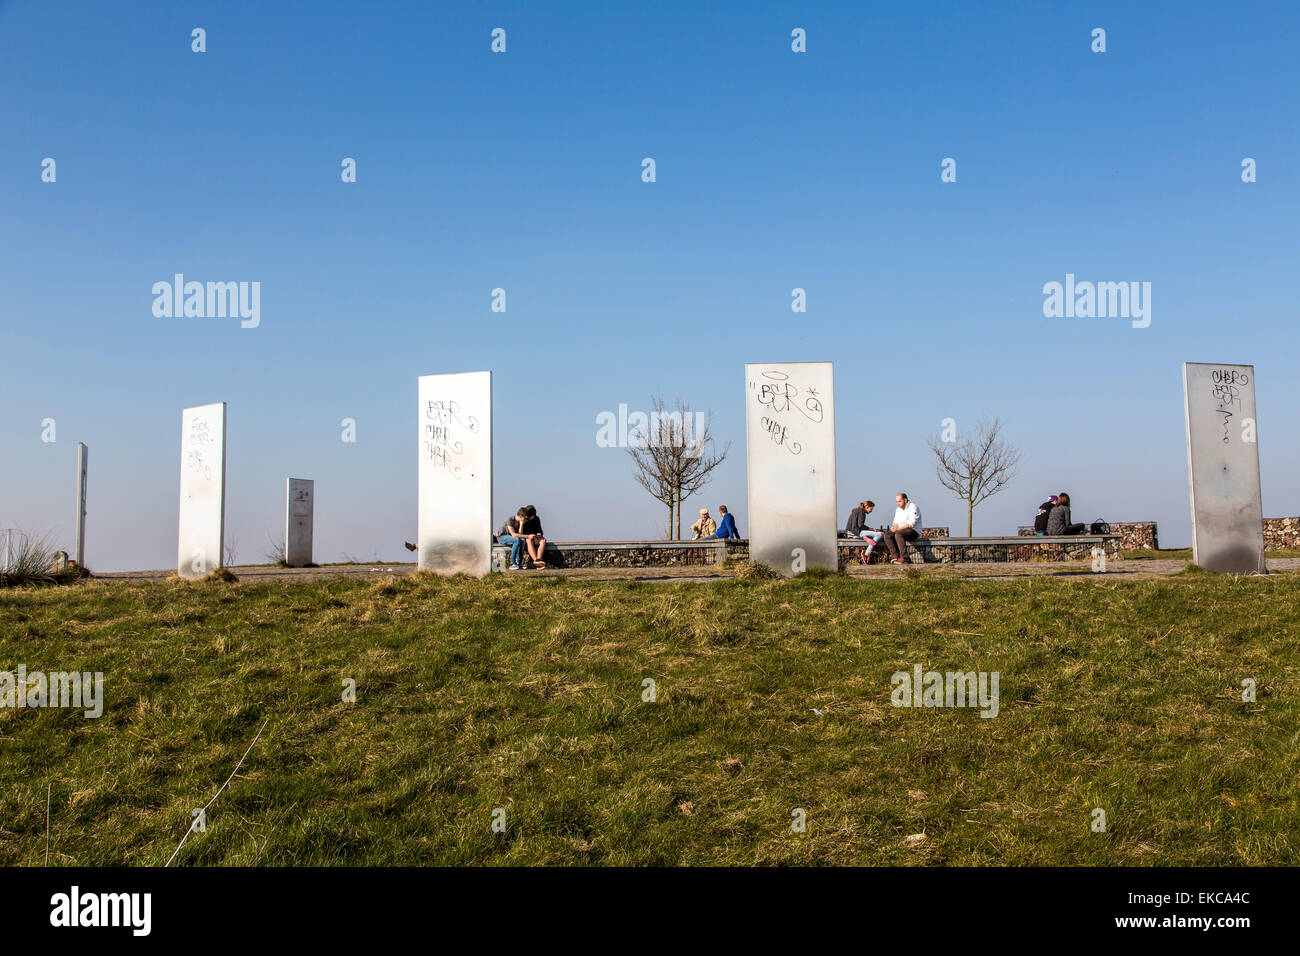 Top of Tippelsberg in Bochum, look over the central Ruhr area, totems made of steel, information boards, Stock Photo